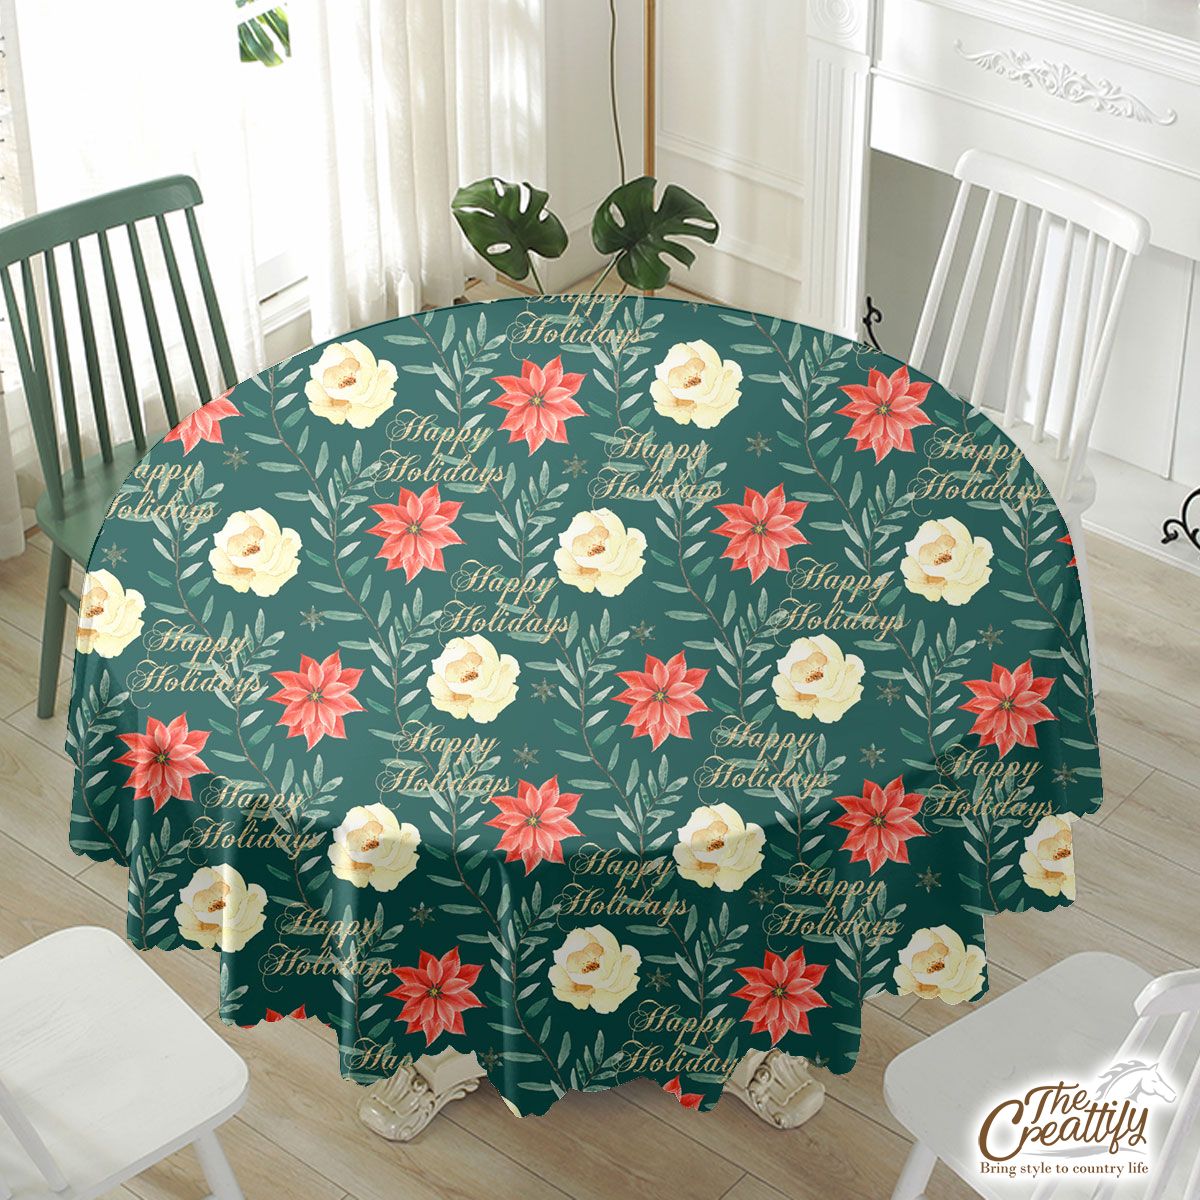 Happy Holidays With Christmas Poinsettia Waterproof Tablecloth